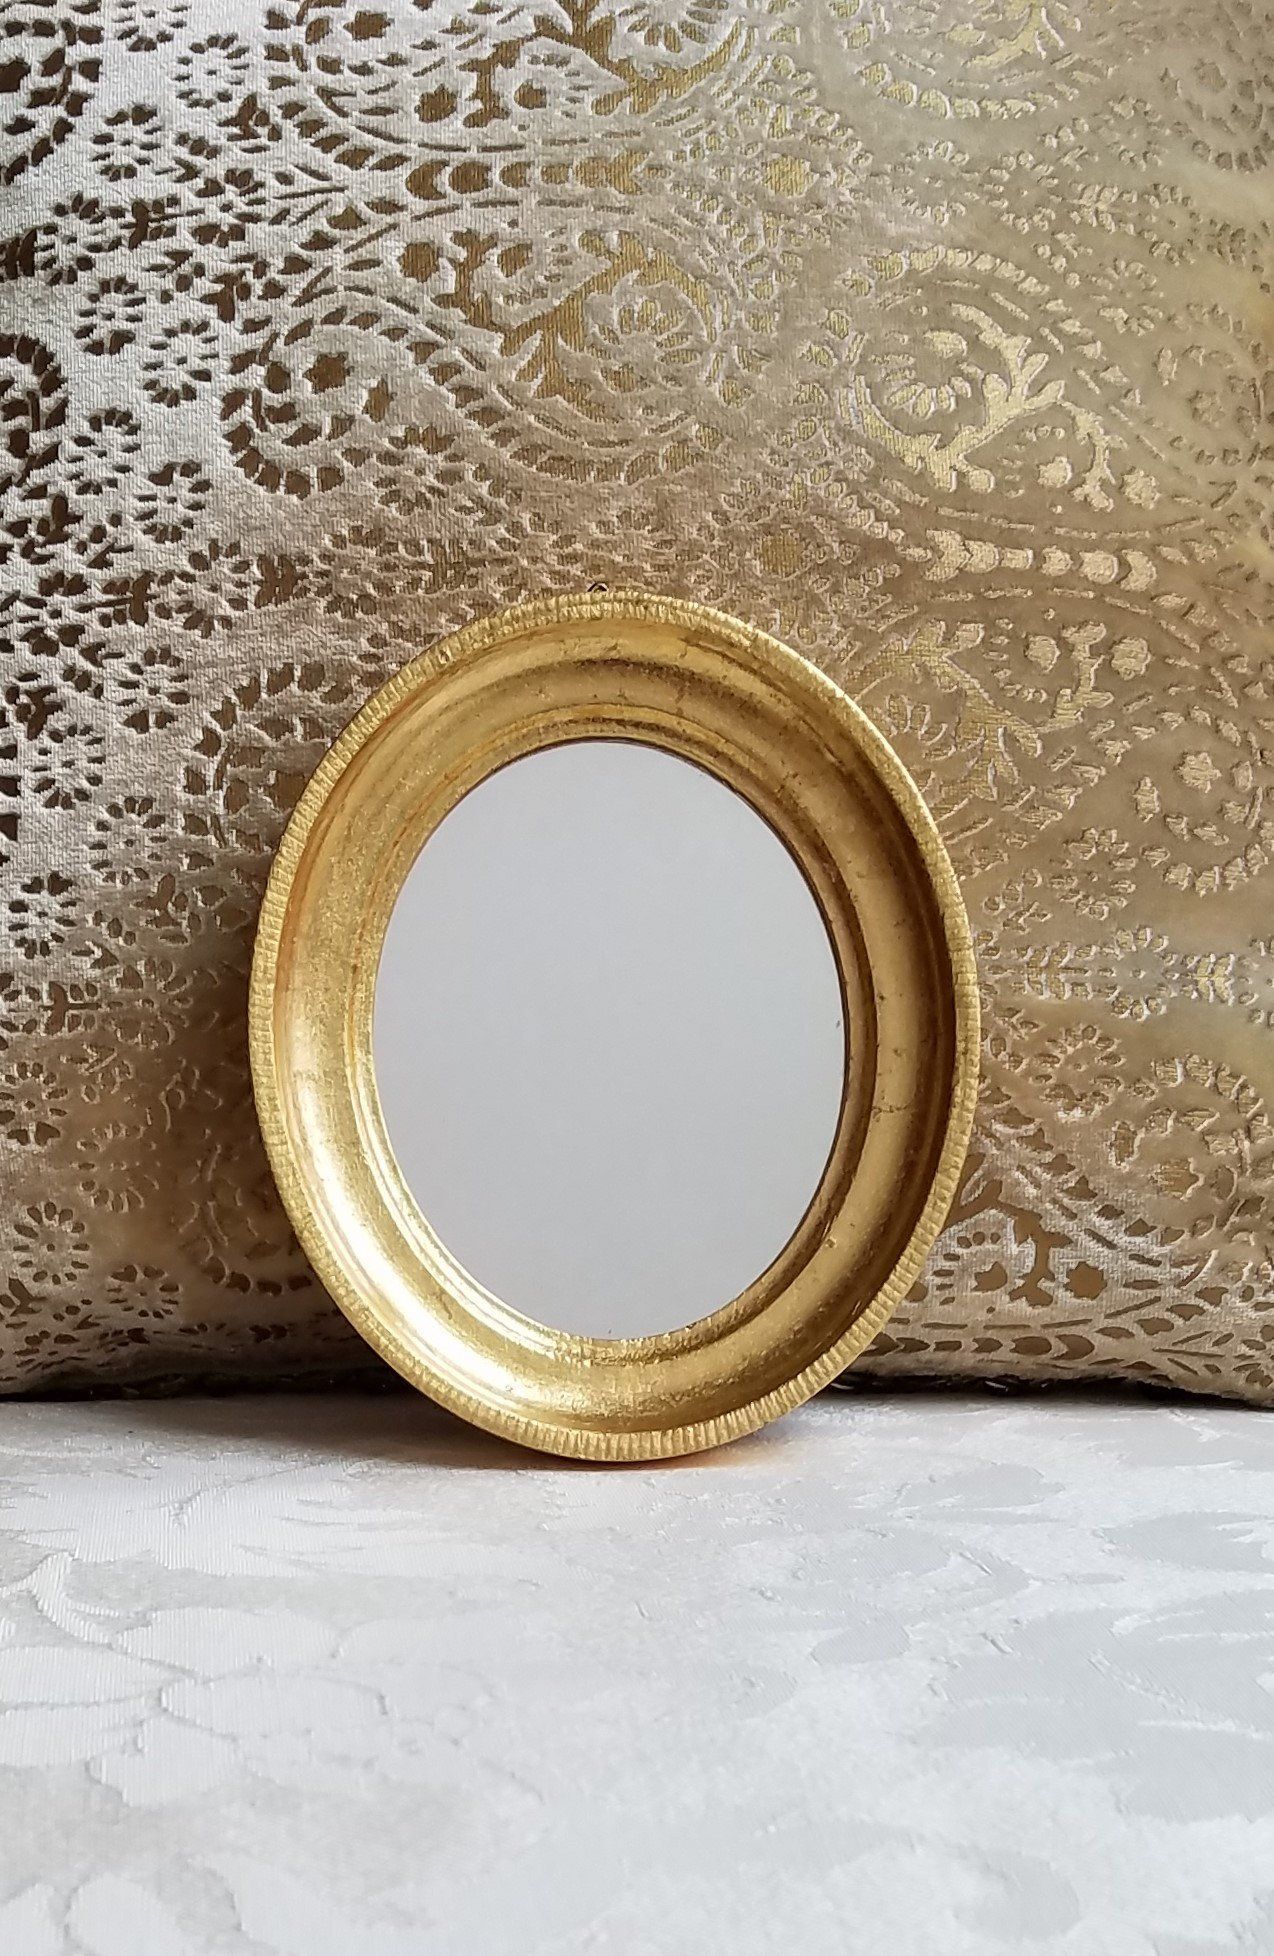 Vintage Gold Wall Mirror Small Oval Florentine Beveled Made In Italy Throughout Gold Metal Mirrored Wall Art (View 10 of 15)